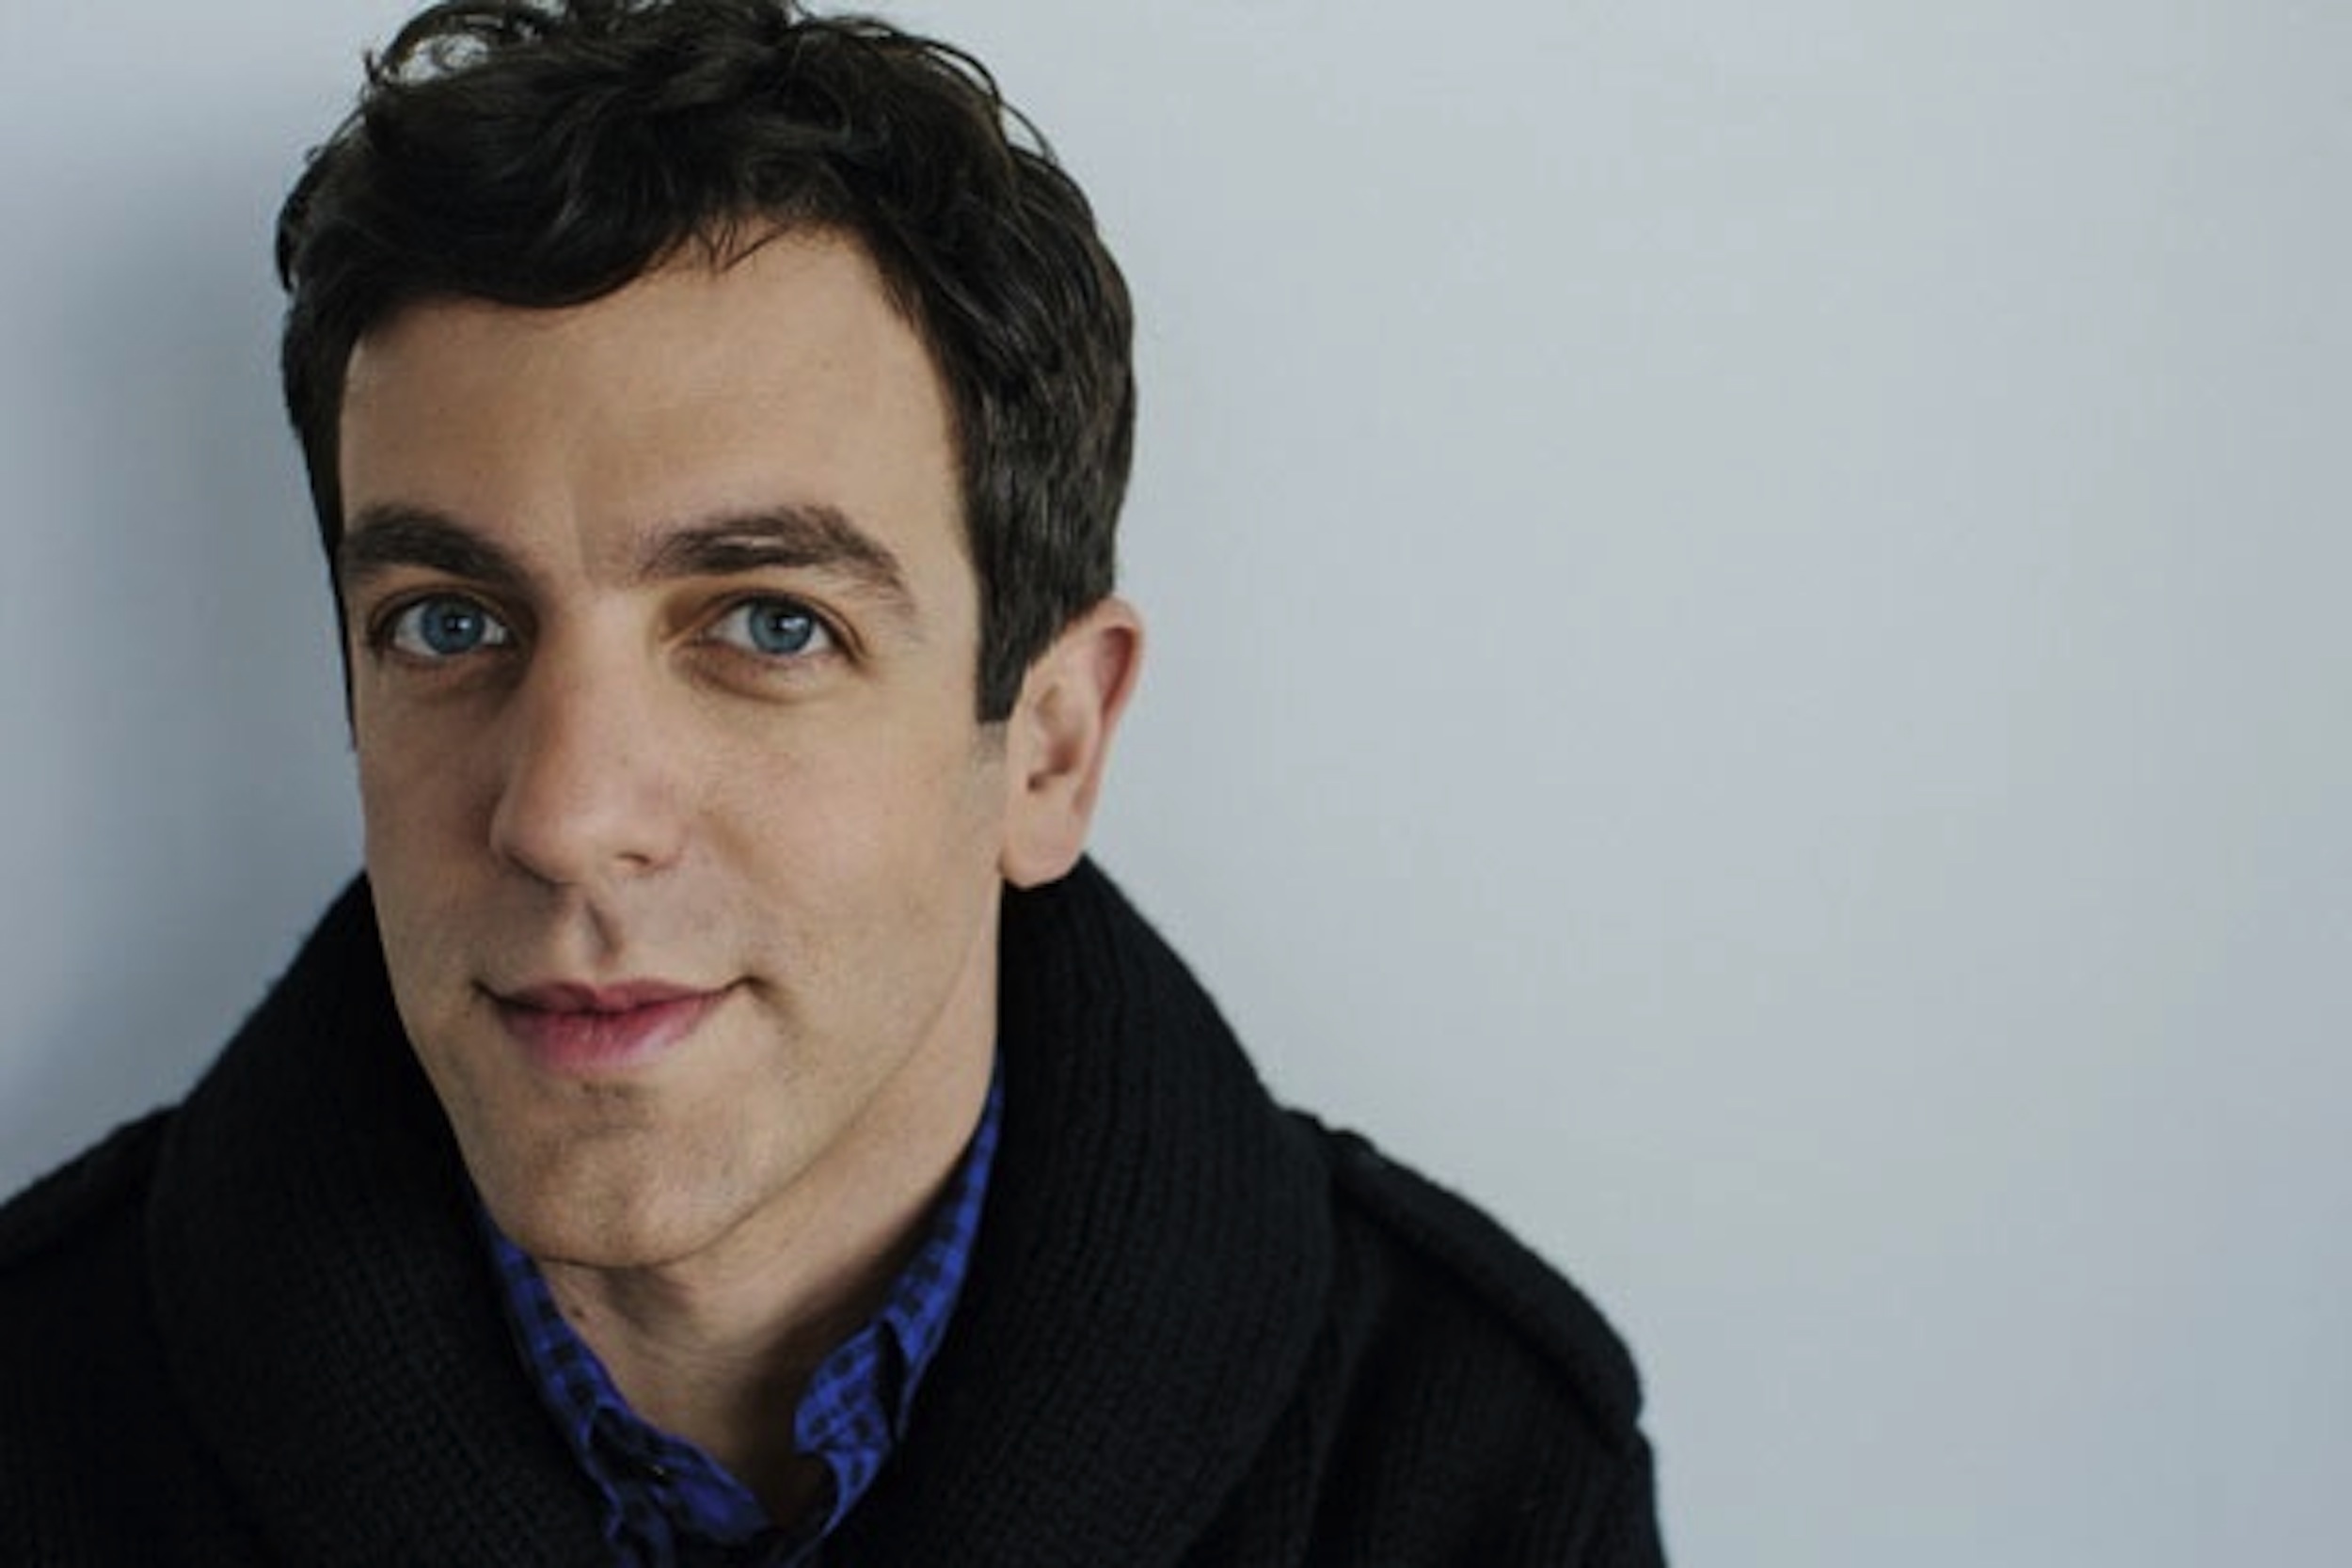 BJ Novak's face is on strange products around the world - Articles